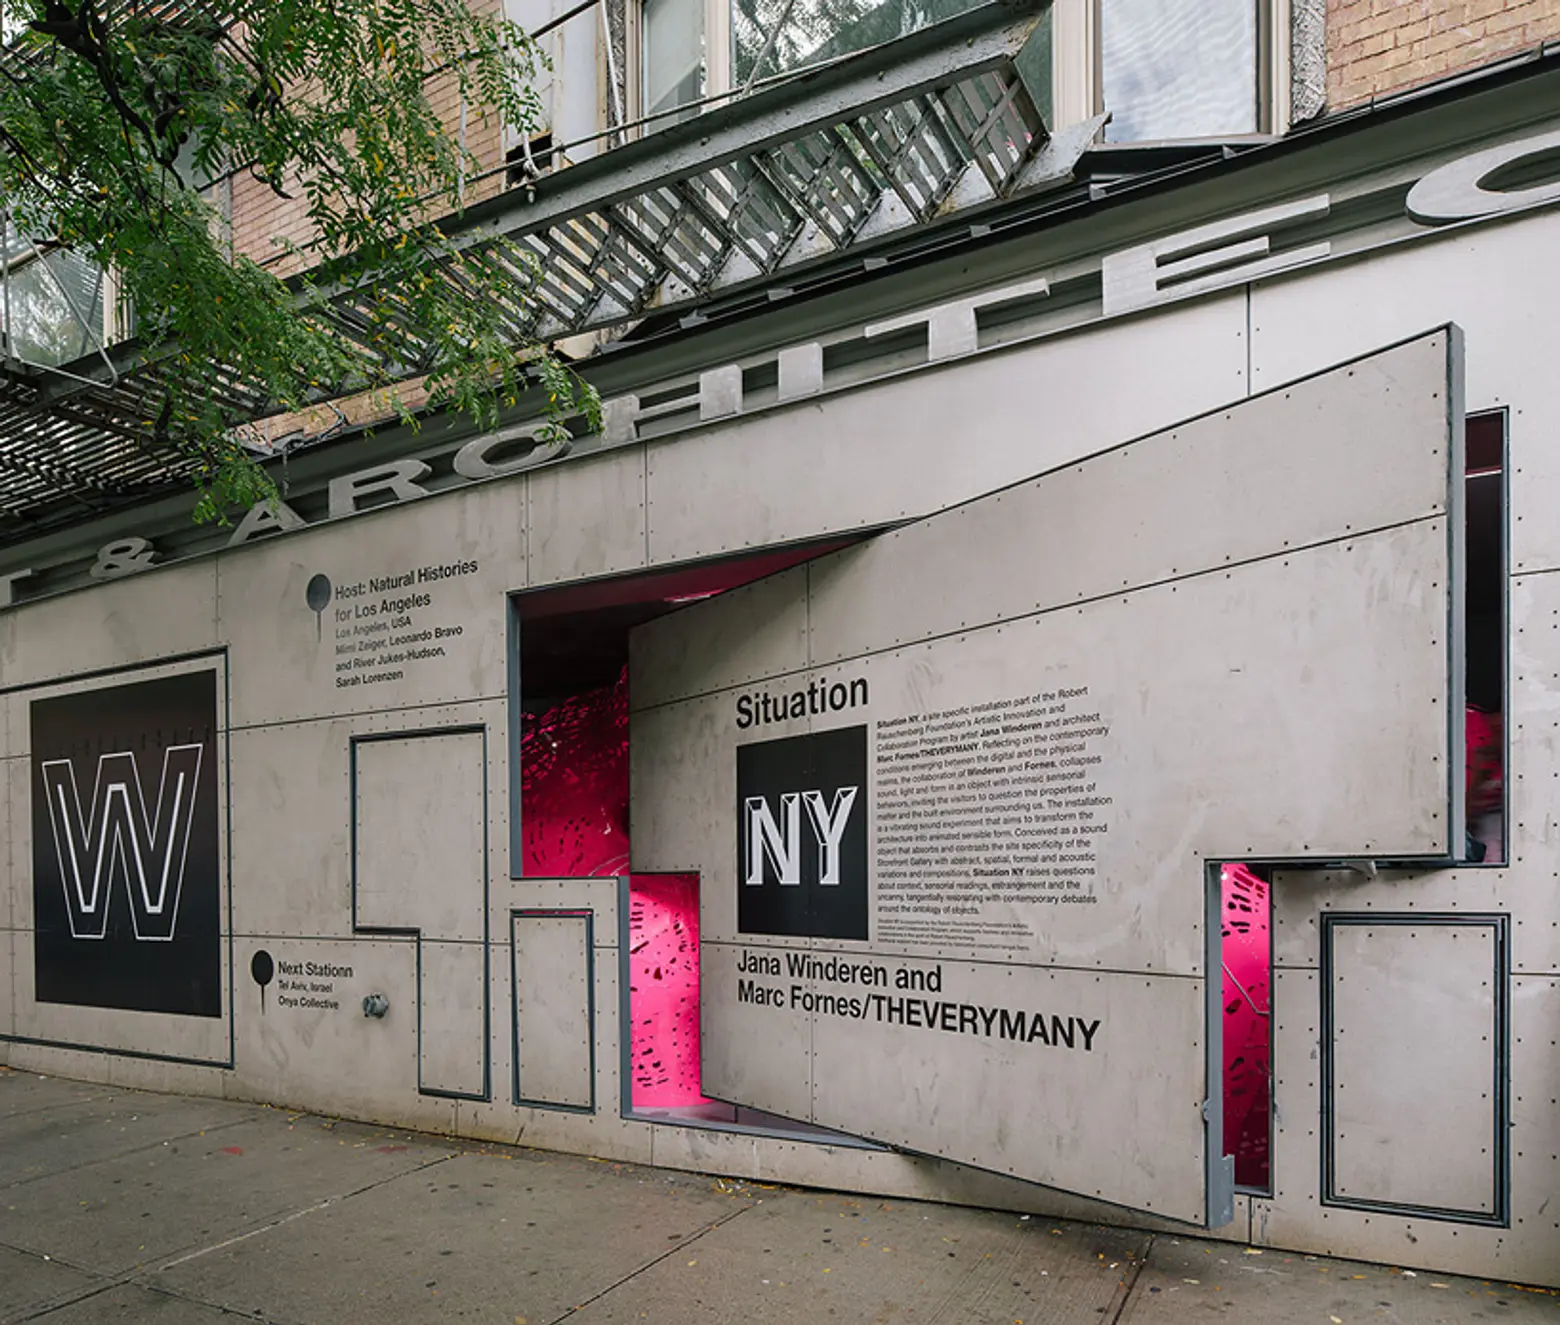 Situation NY, Storefront for Art and Architecture, Jana Winderen, Marc Fornes